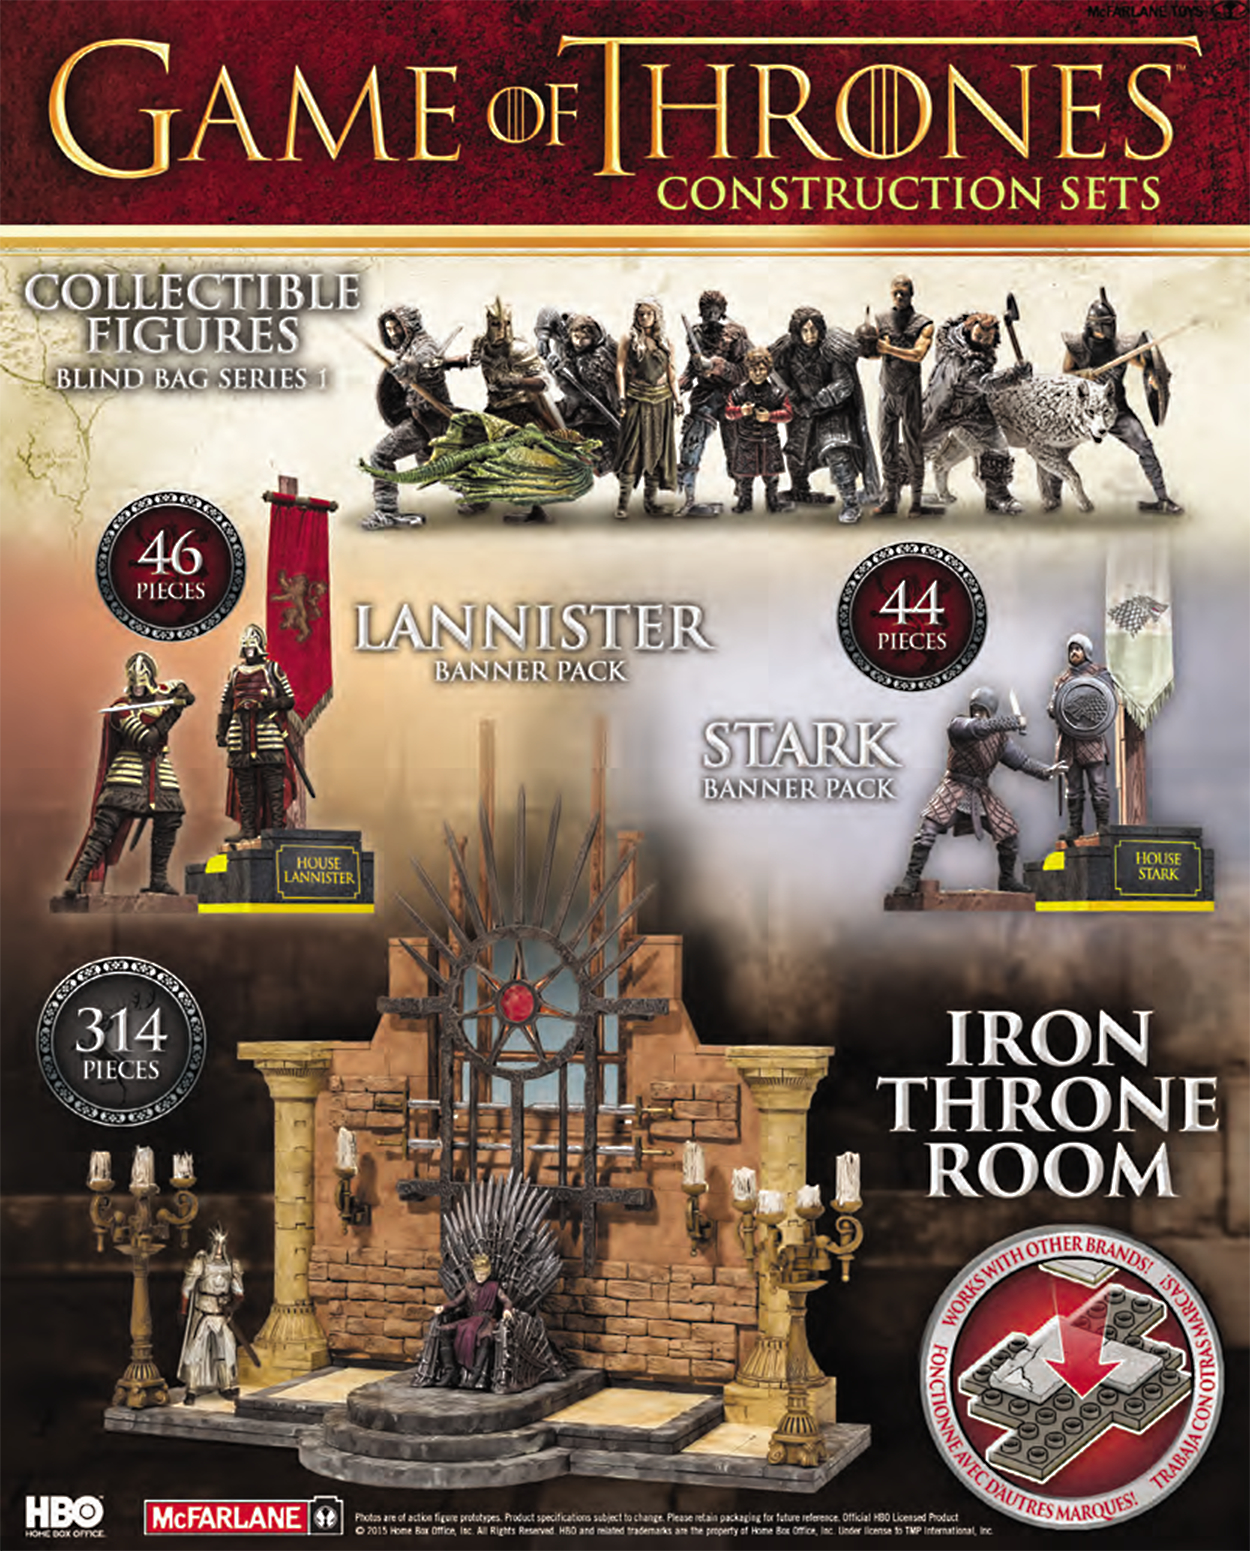 Game of Thrones Banner Pack Construction Set Lannister 